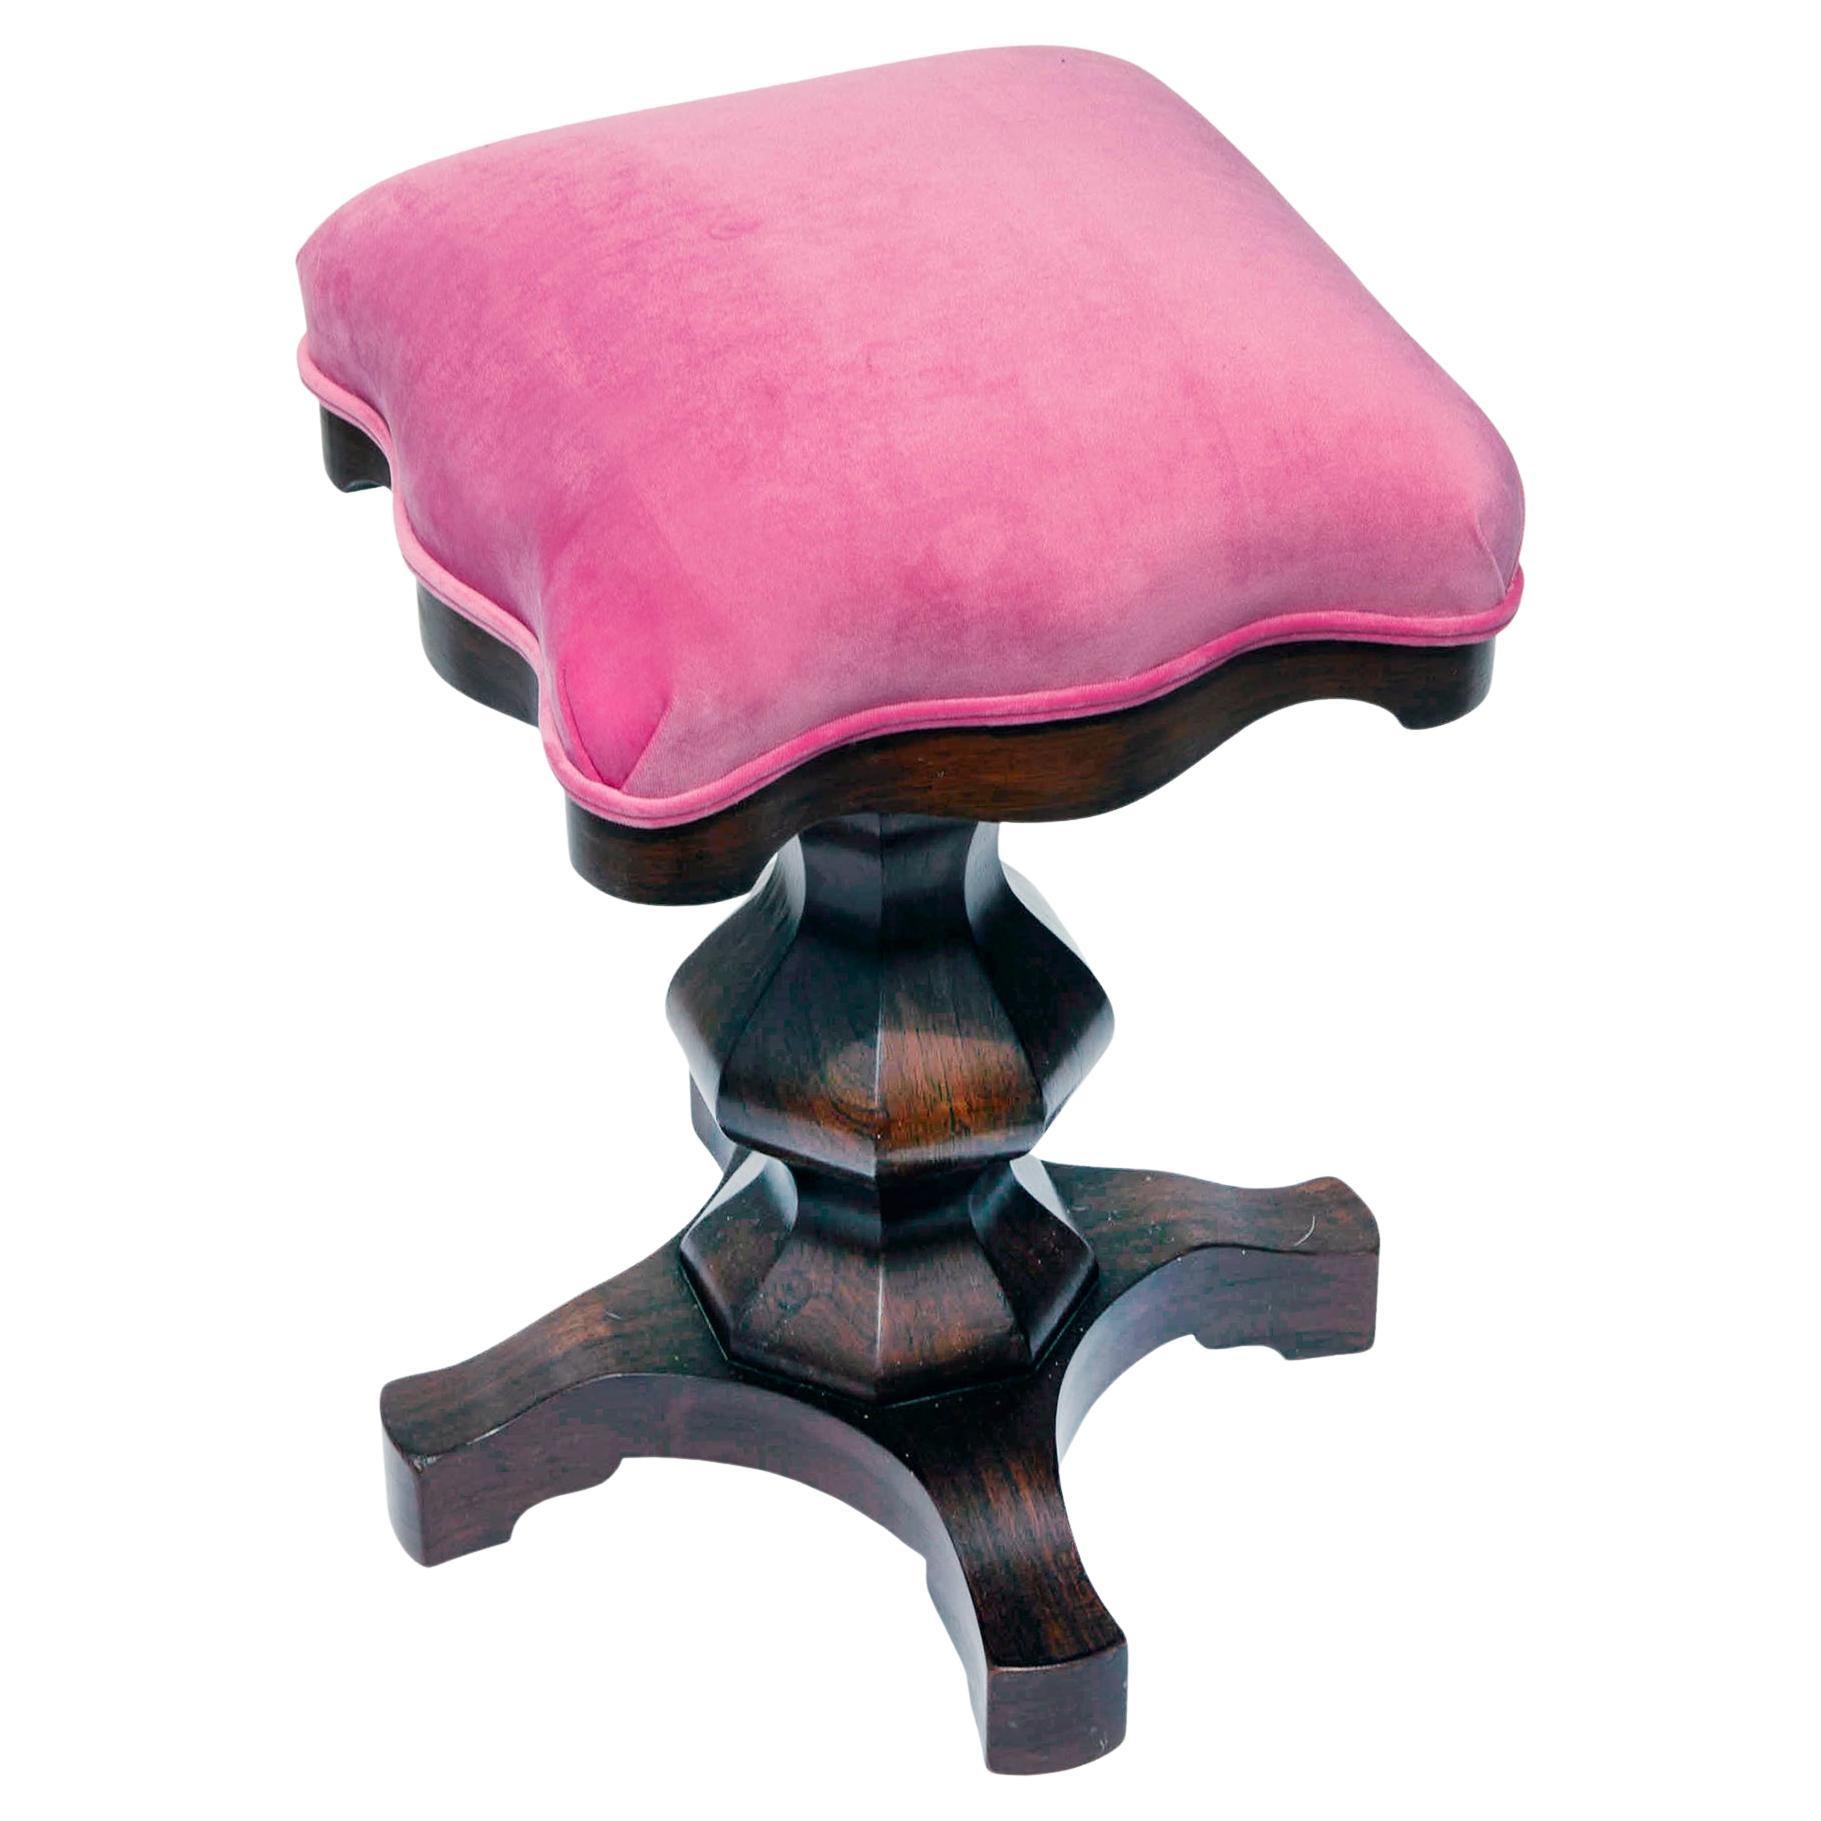 Rare Piano stool with beautiful geometric pedestal base. 
This mechanical chair raises & lowers without a creak. 
A perfectly crafted piece reupholstered in playful raspberry velvet.
This piano stool is in near perfect condition 
14ʺW × 14ʺD × 22ʺH